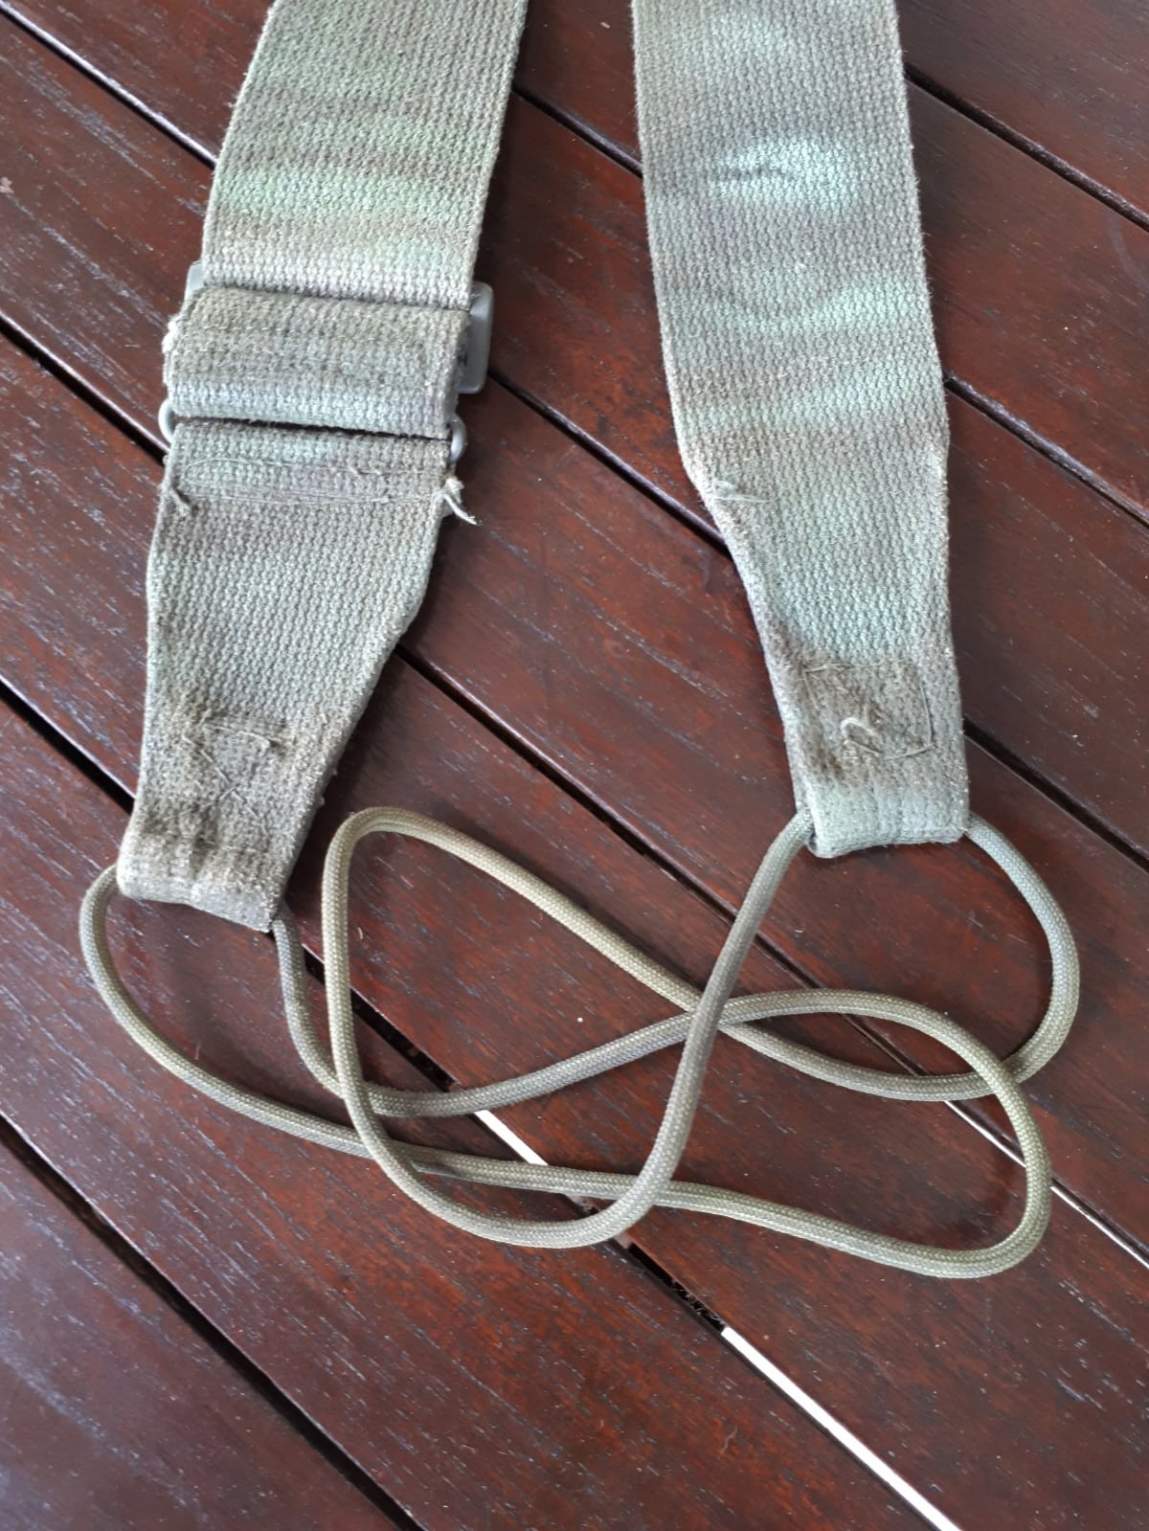 XM1777 Field Expedient Sling